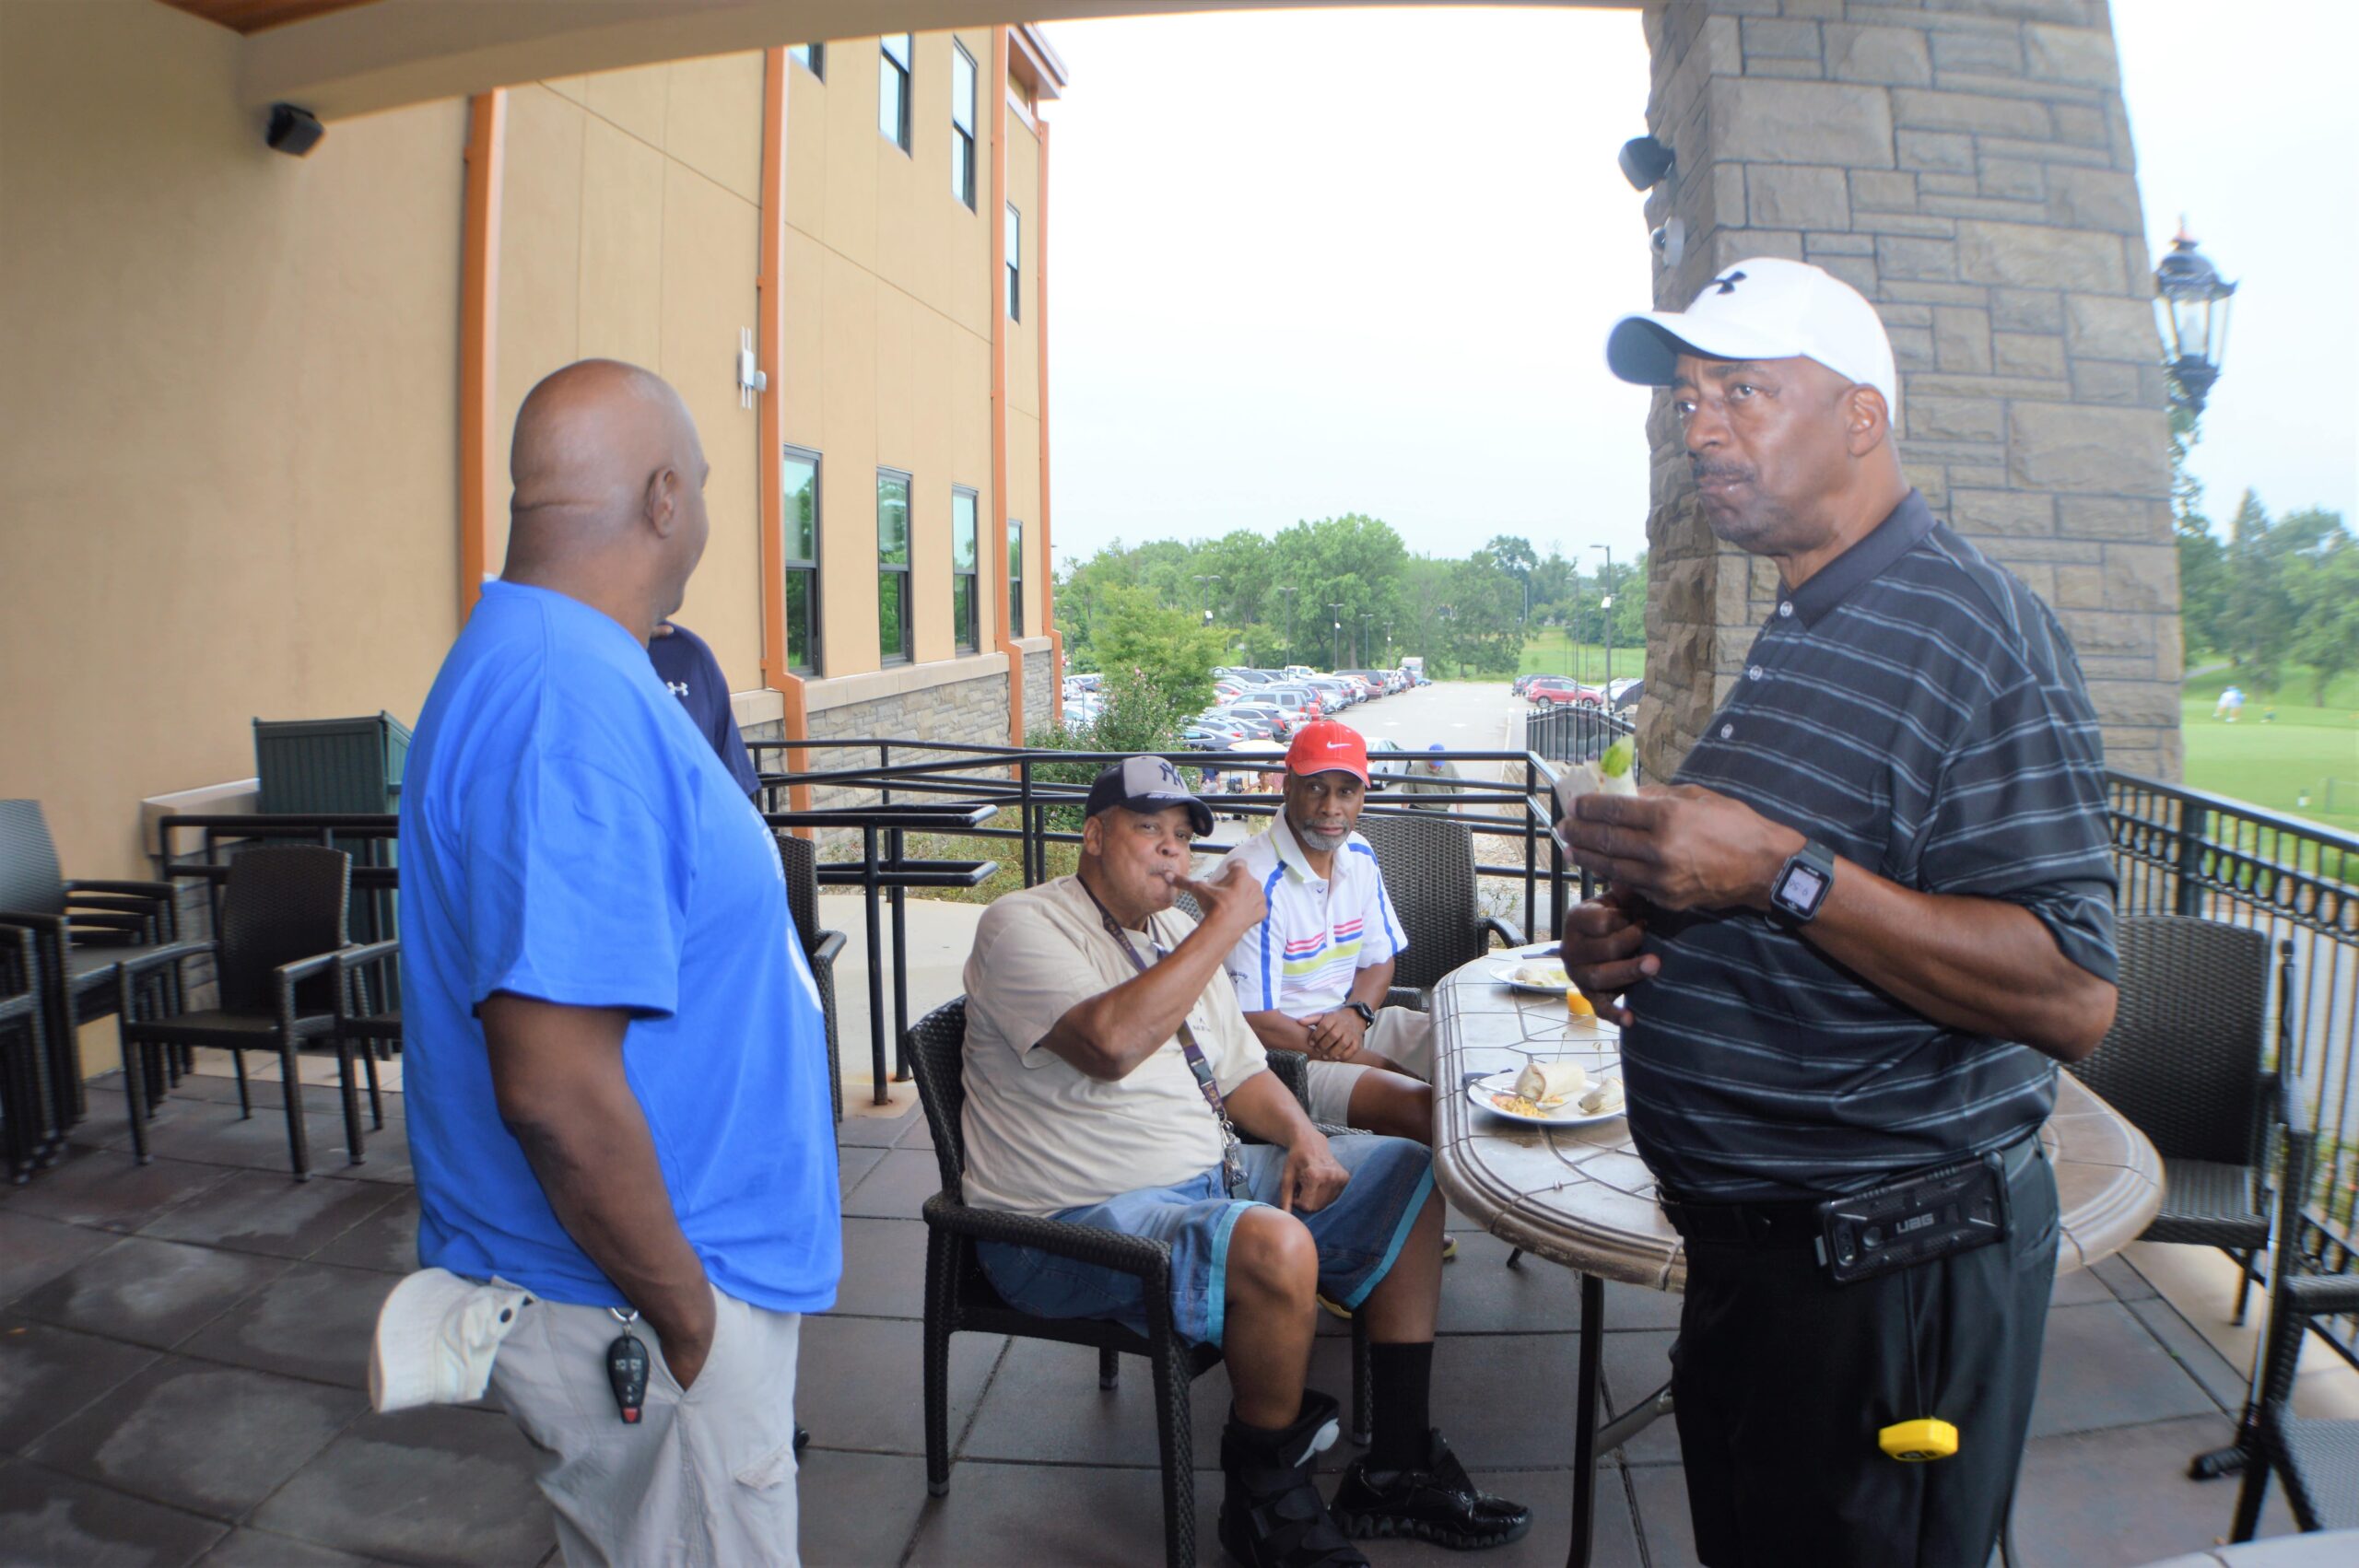 2018 GOLF OUTING – 95